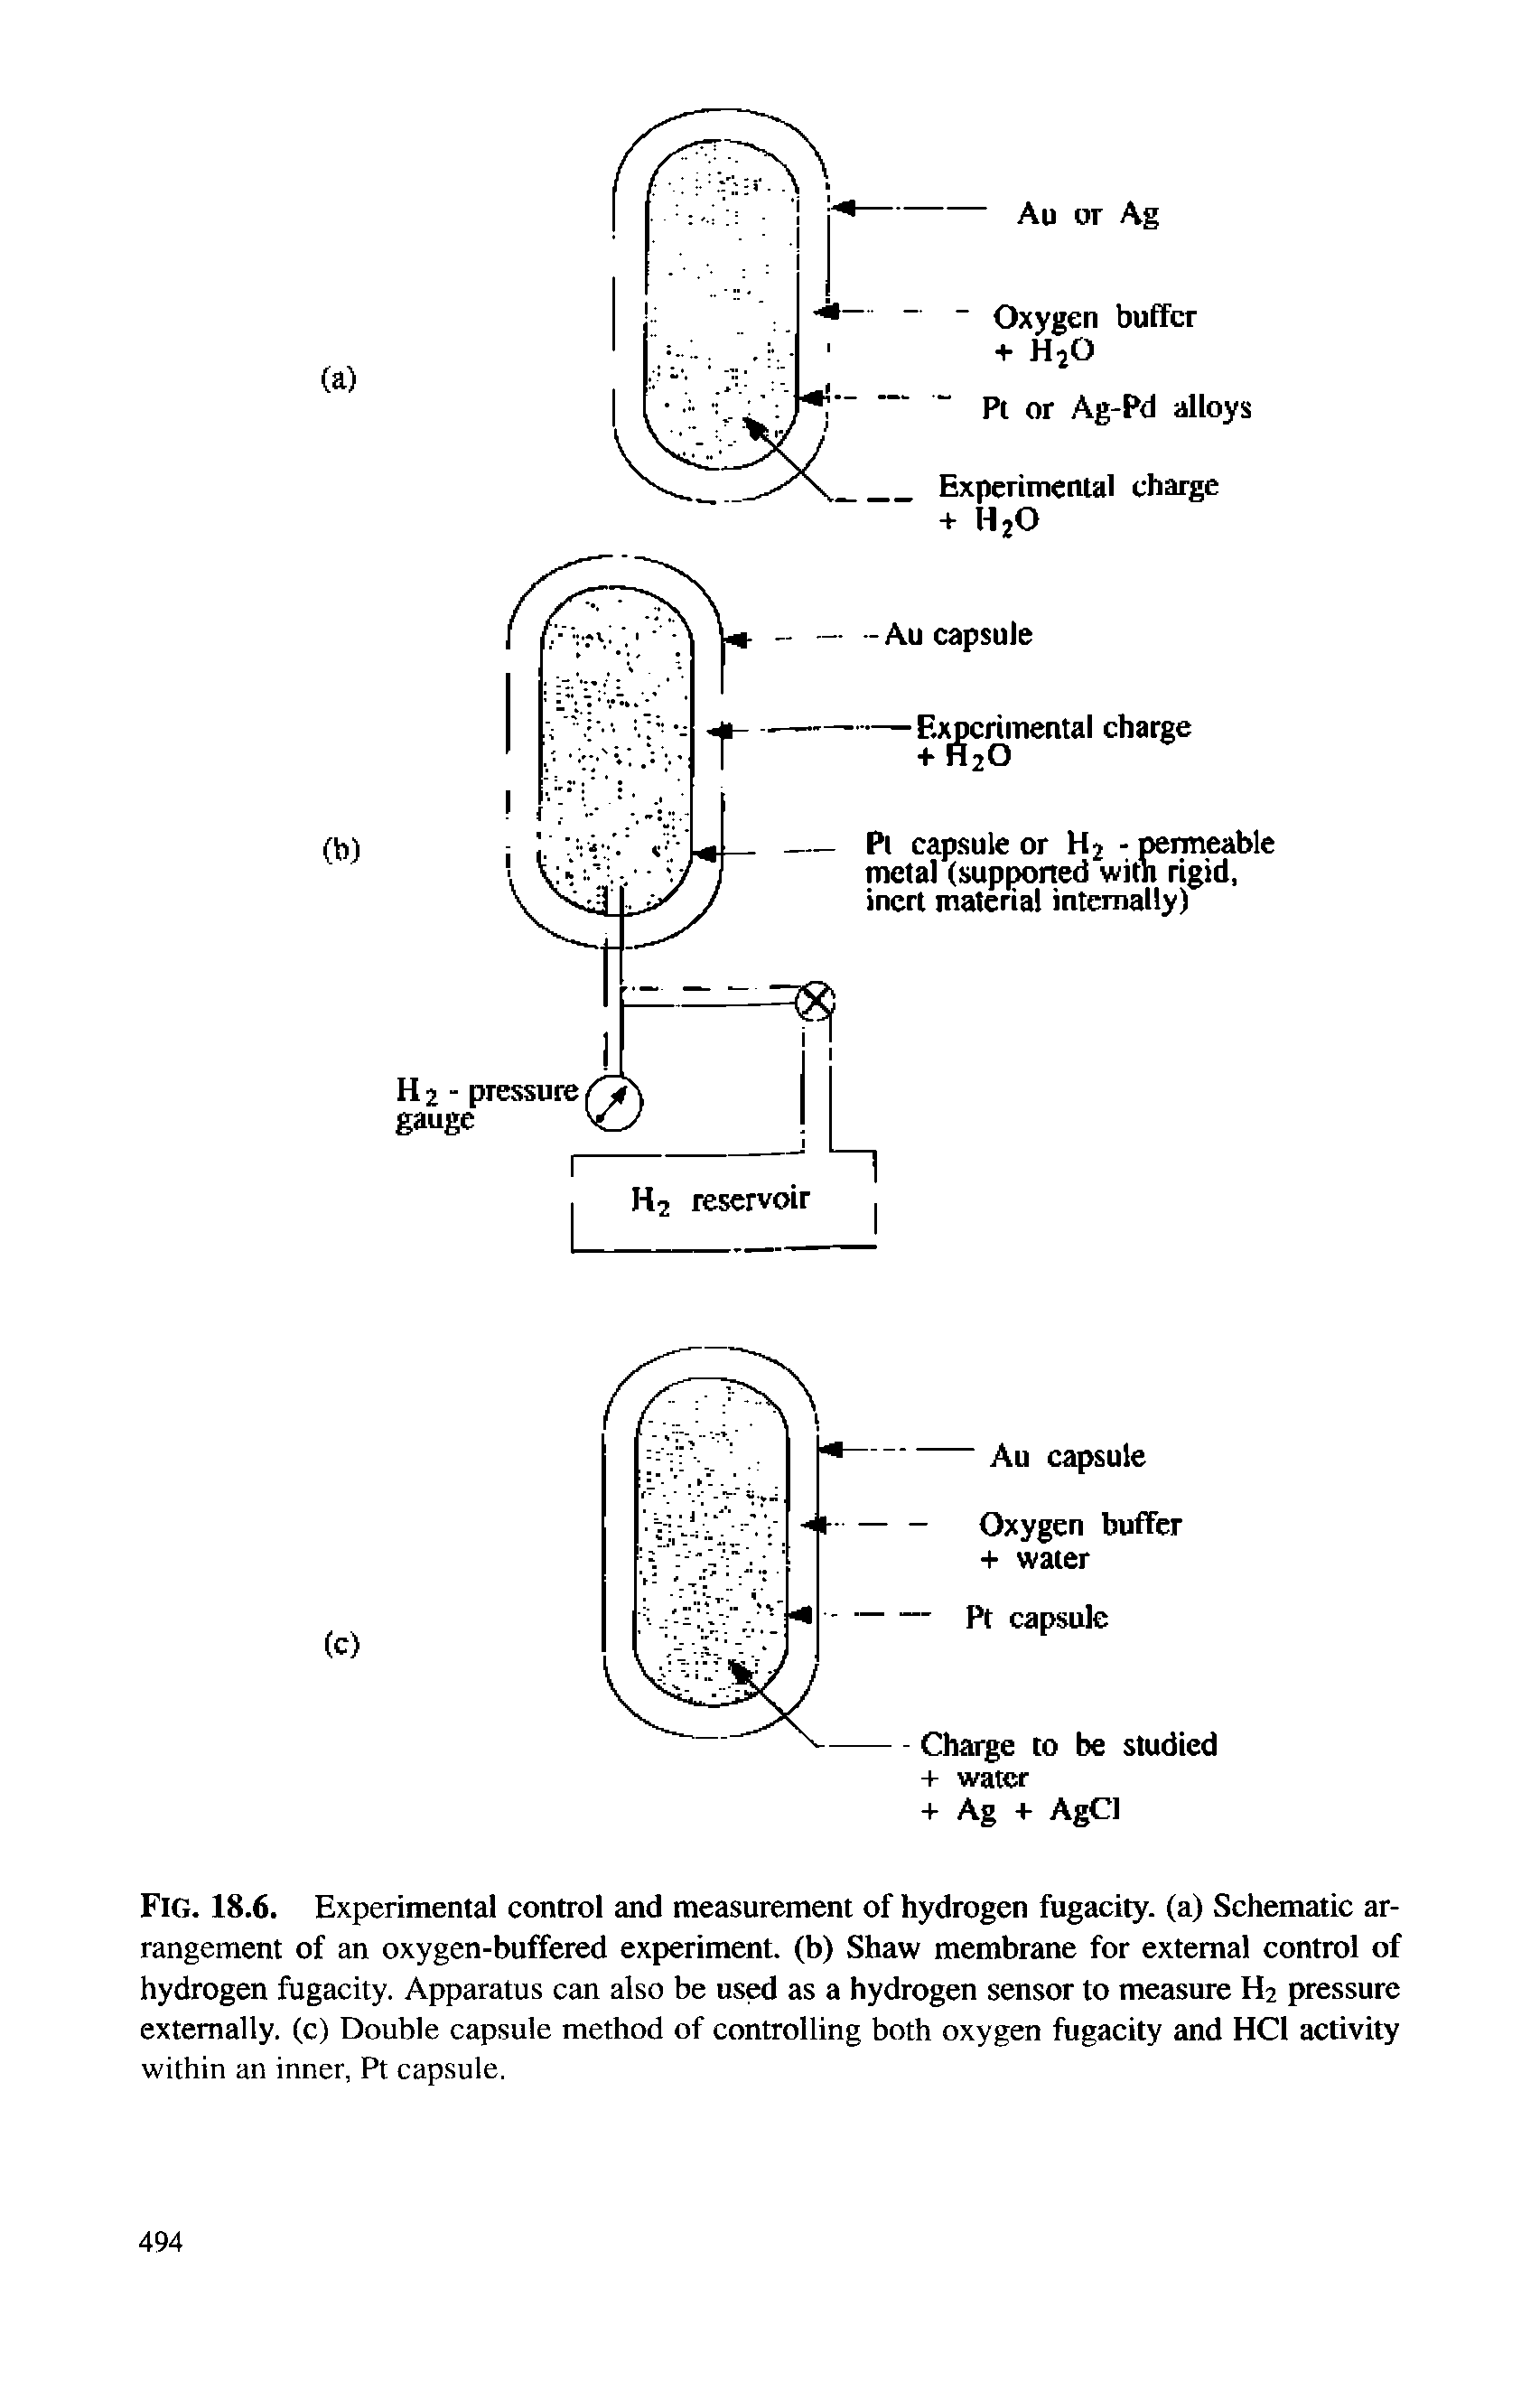 Fig. 18.6. Experimental control and measurement of hydrogen fugacity. (a) Schematic arrangement of an oxygen-buffered experiment, (b) Shaw membrane for external control of hydrogen fugacity. Apparatus can also be used as a hydrogen sensor to measure H2 pressure externally, (c) Double capsule method of controlling both oxygen fugacity and HCl activity within an inner, Pt capsule.